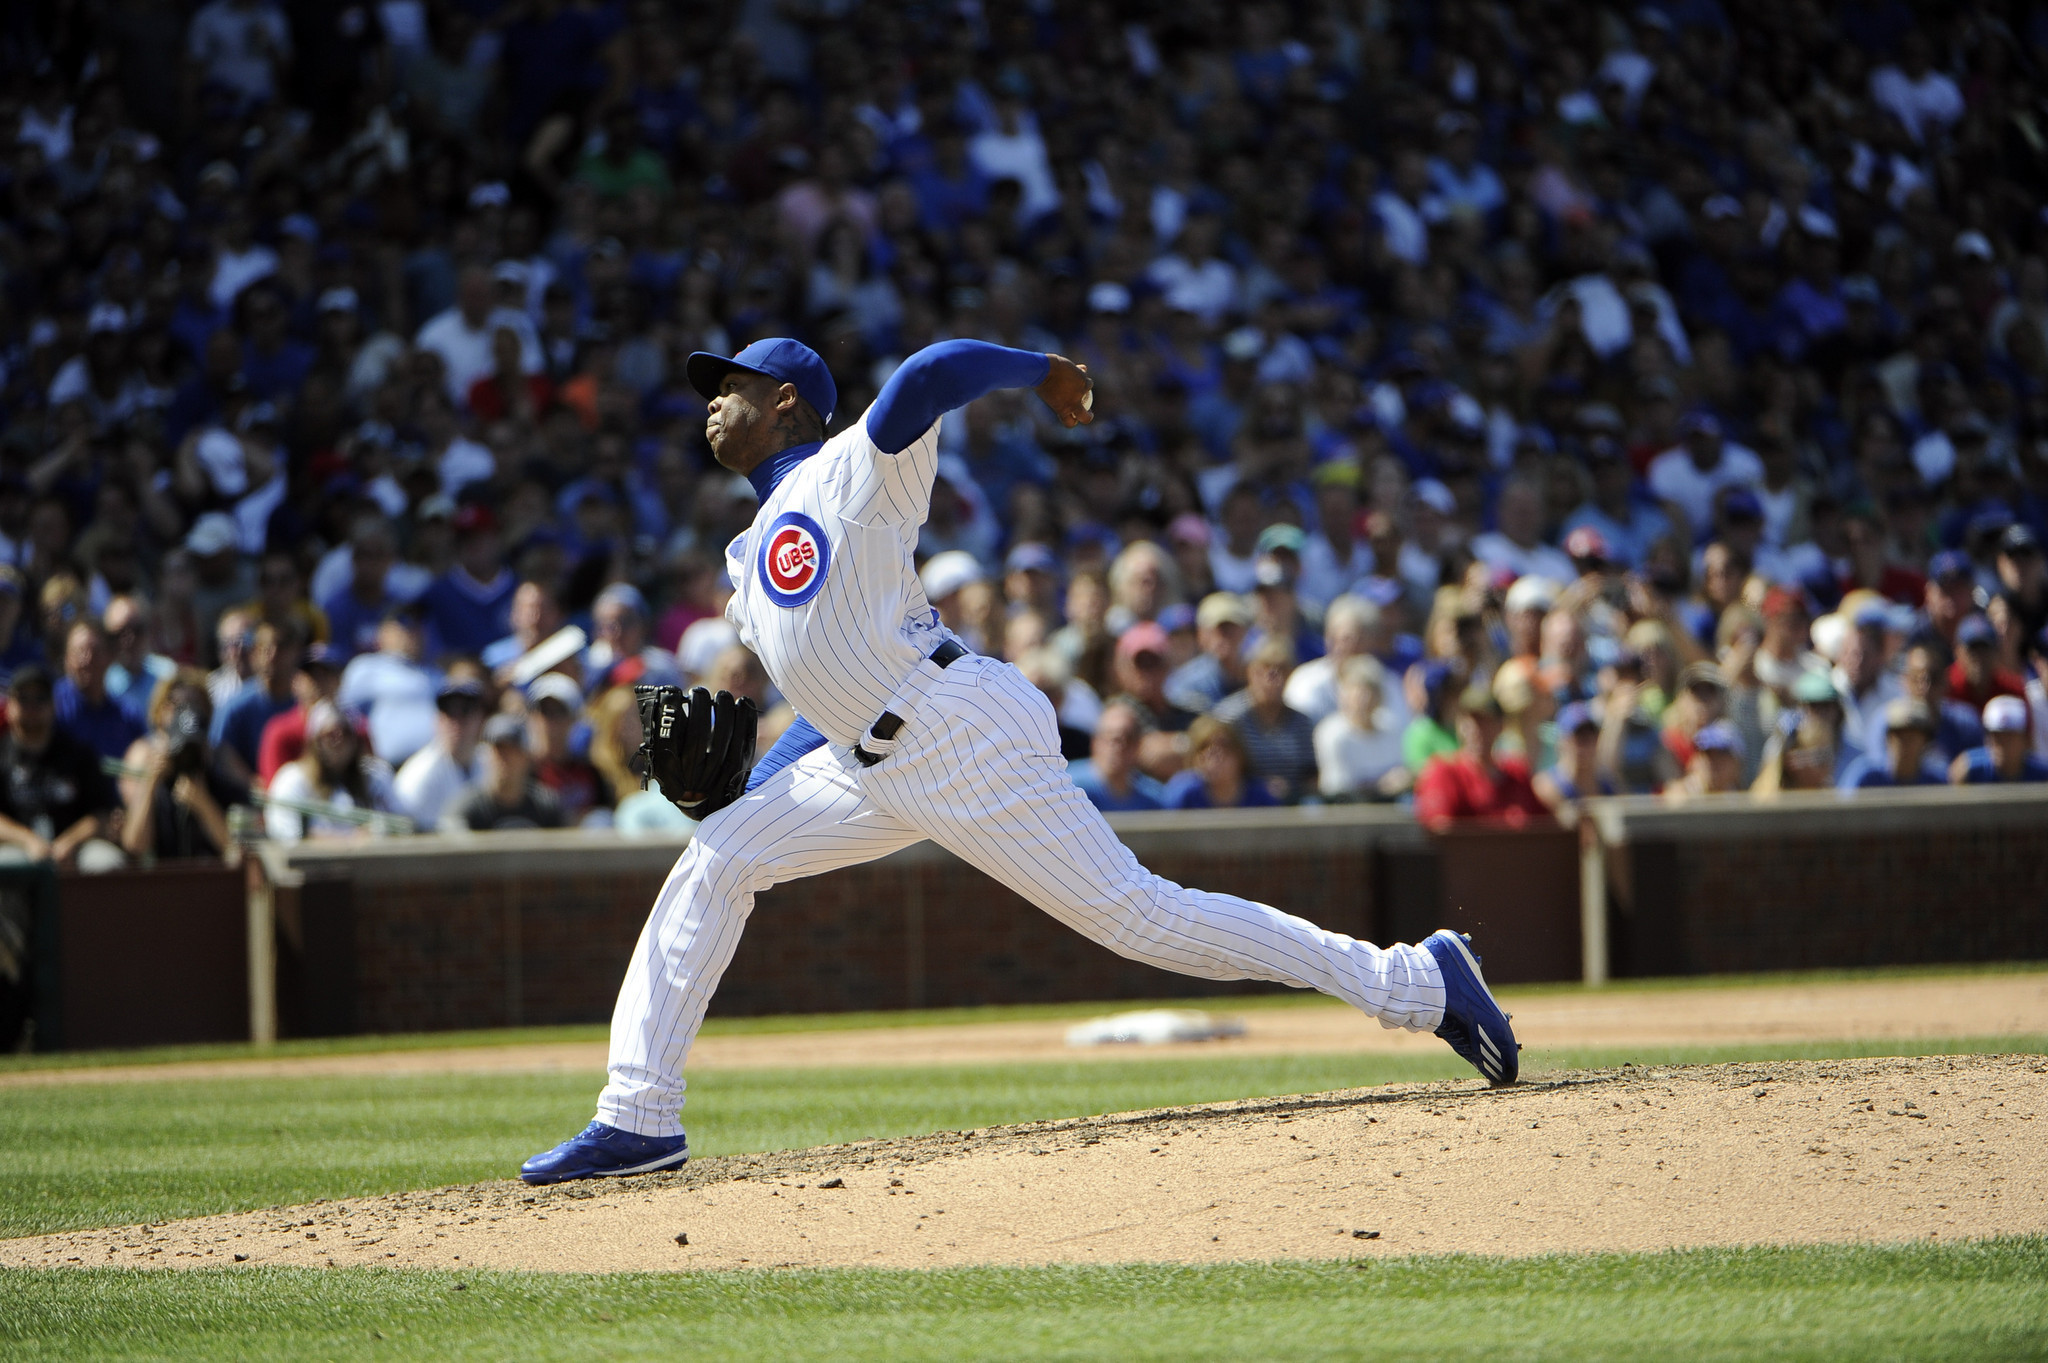 Cubs trade with Yankees: Welcome to the Cubs, Chapman!